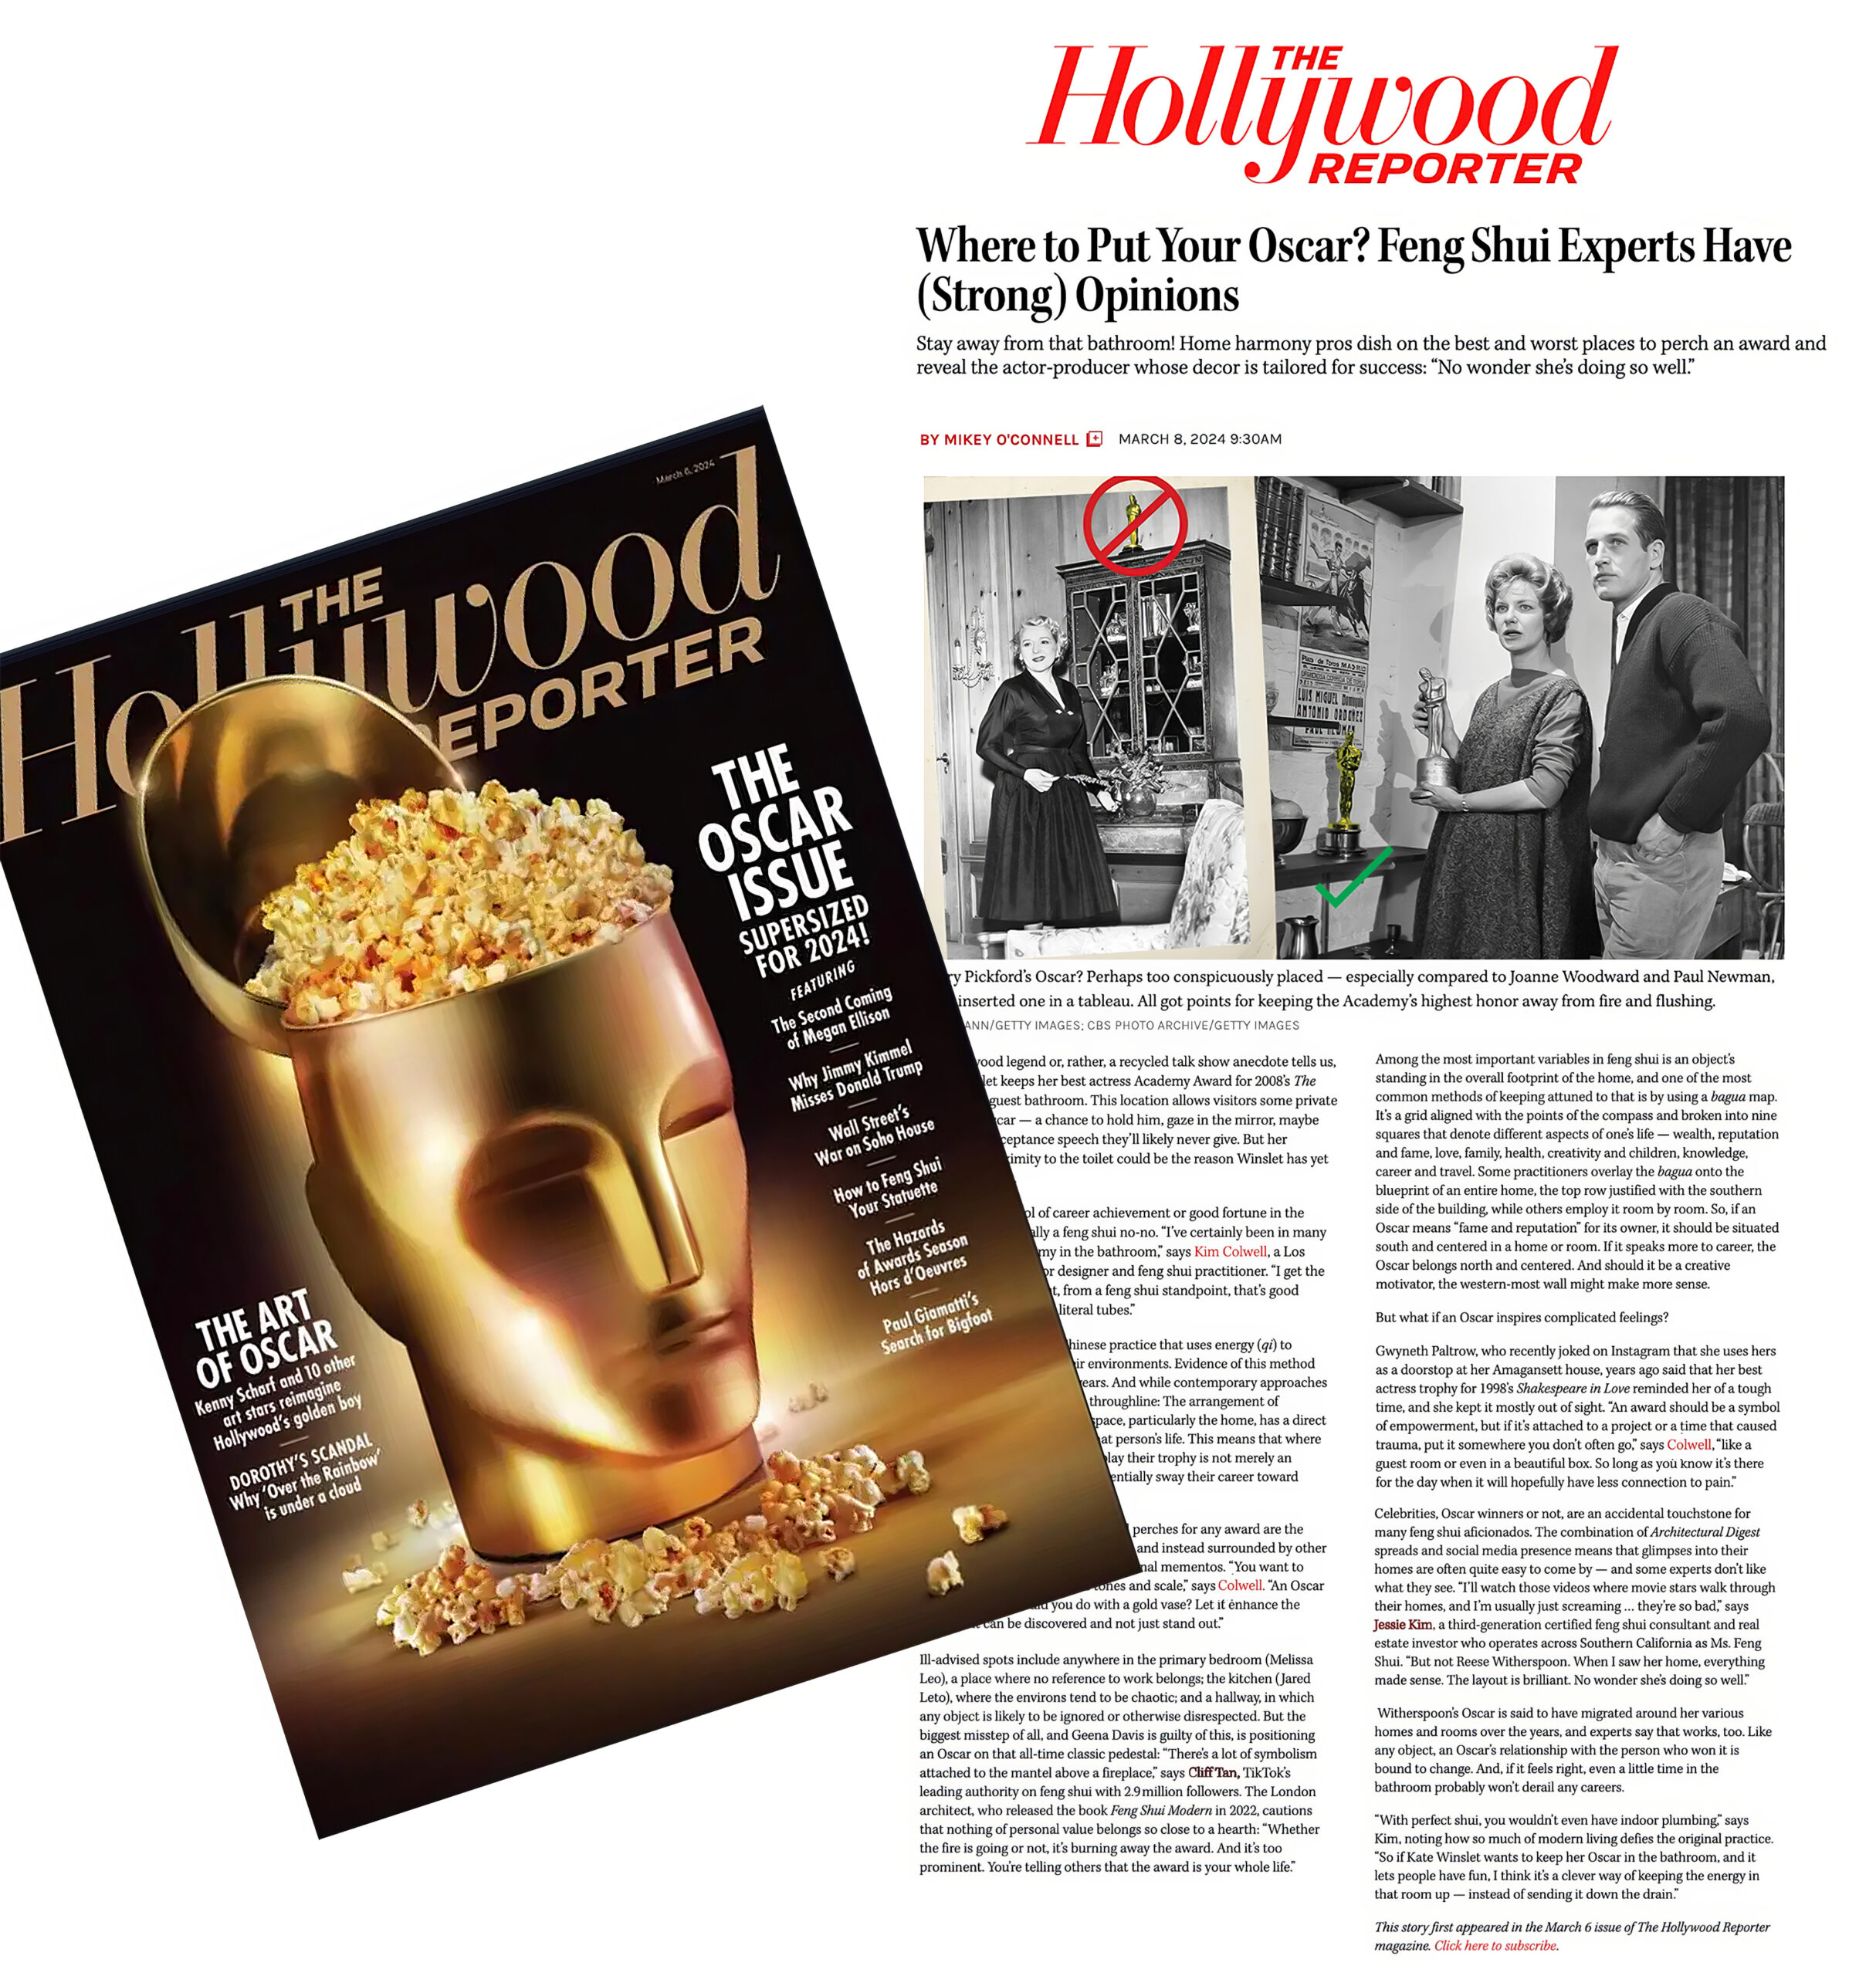 Hollywood Reporter interview with Kim Colwell, Oscar issue 2024.